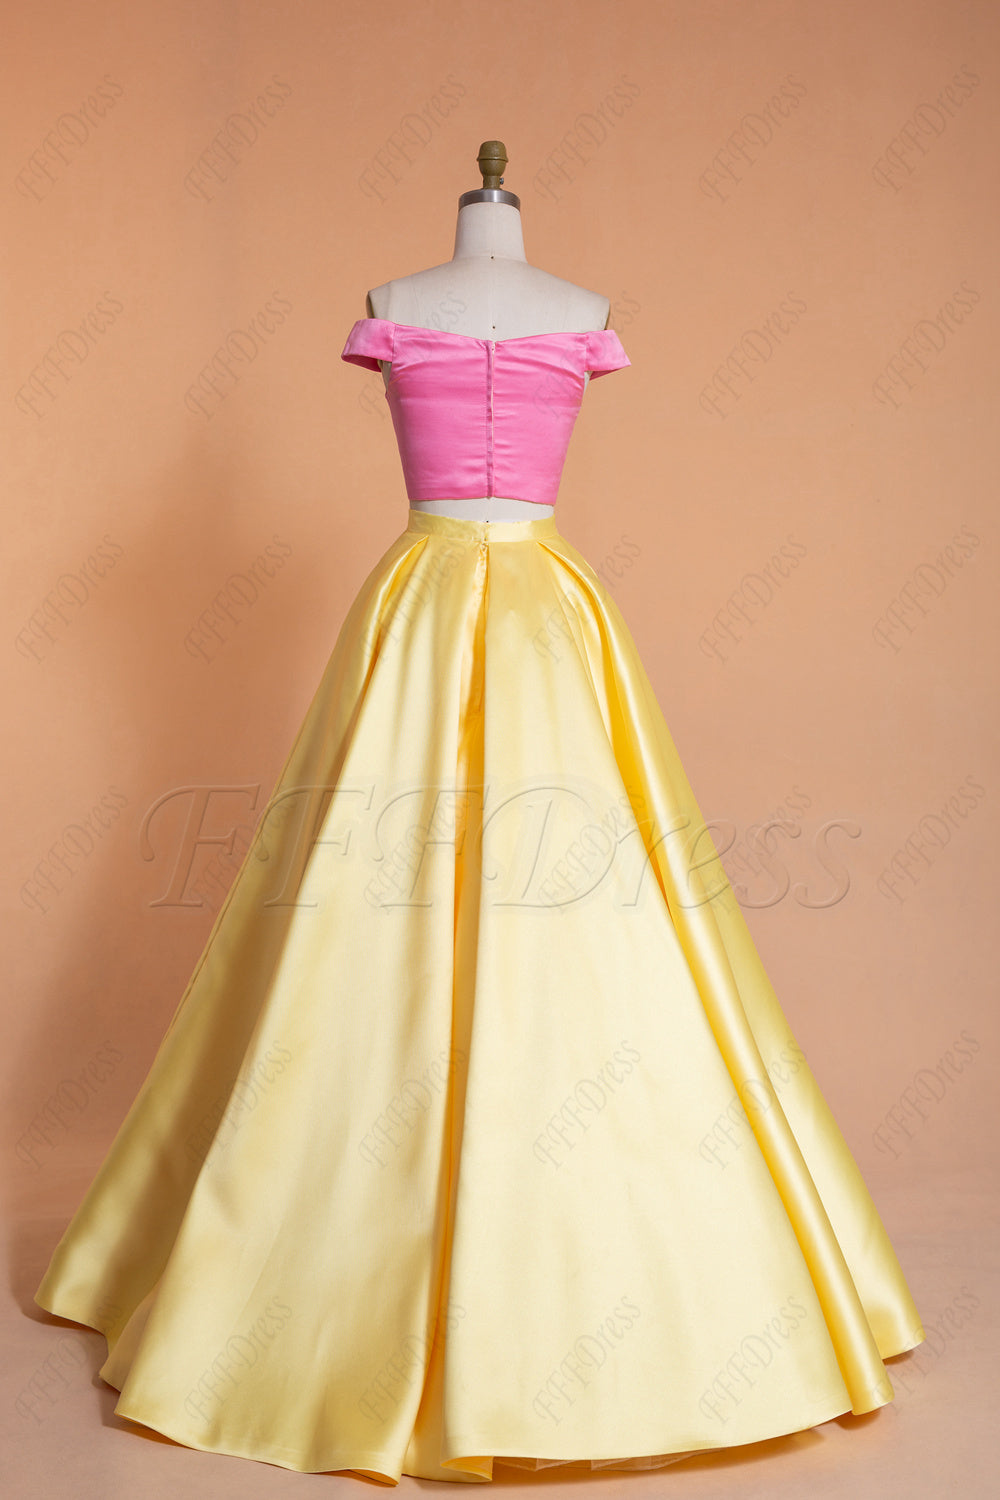 Two Piece Yellow Pink Prom Dresses Long Off the Shoulder